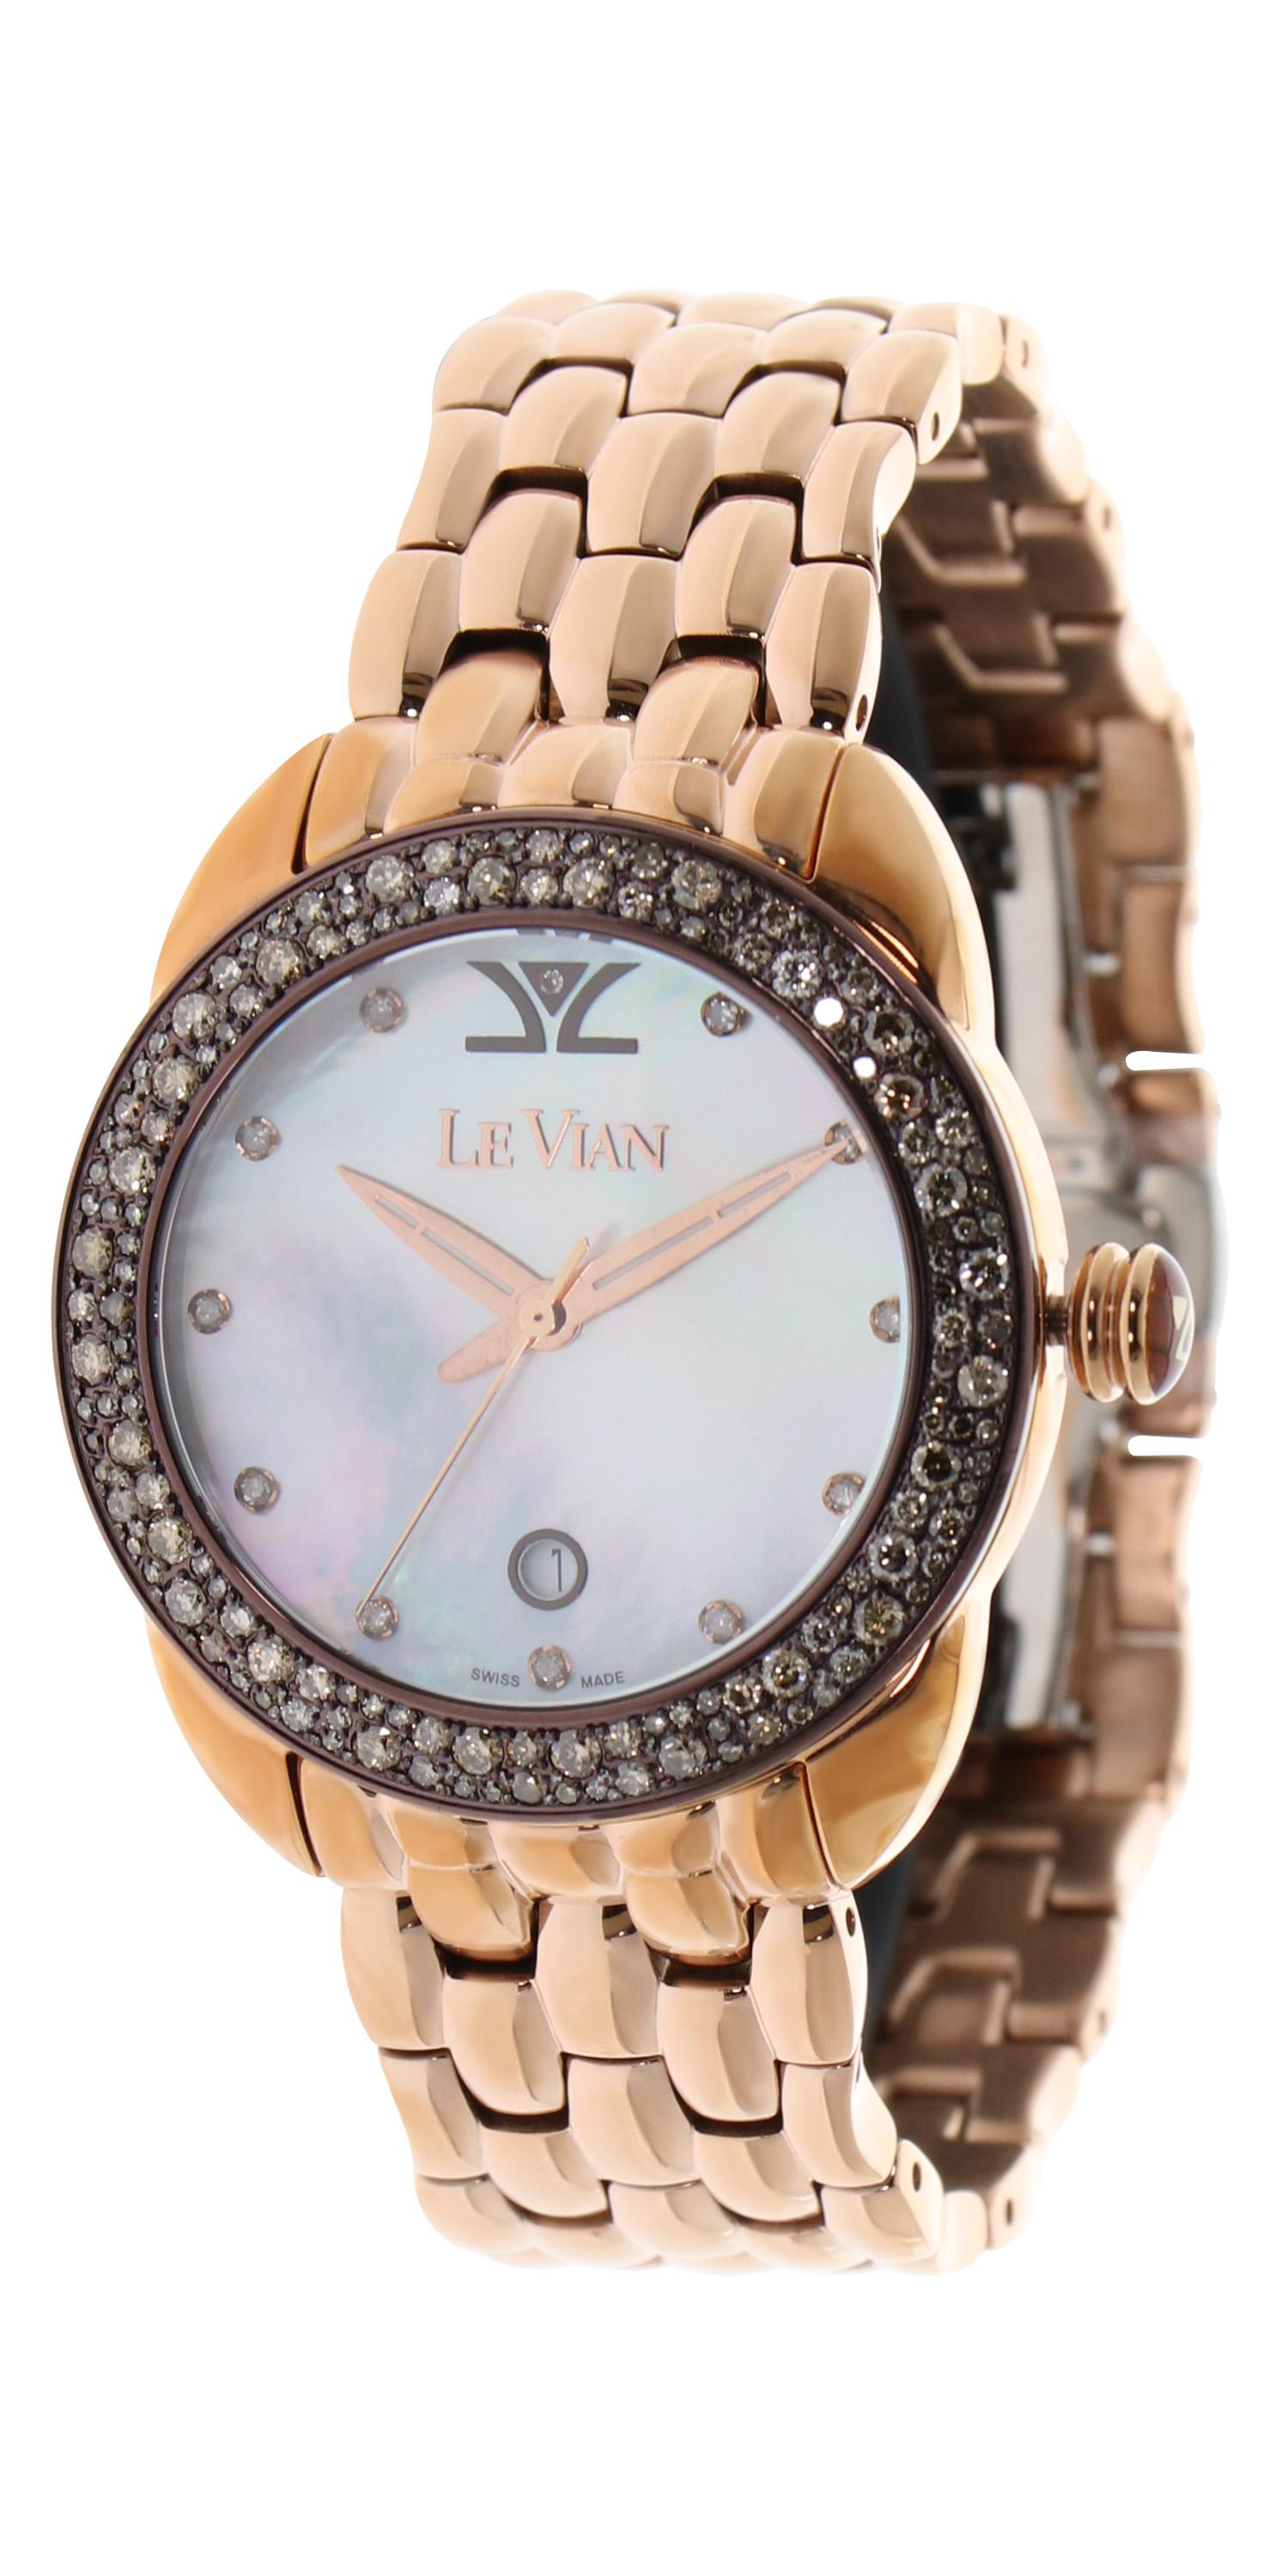 Le Vian 38mm round Wristwatch with 1.93cts of Chocolate and Vanilla Diamonds in Strawberry Gold Stainless Steel.
